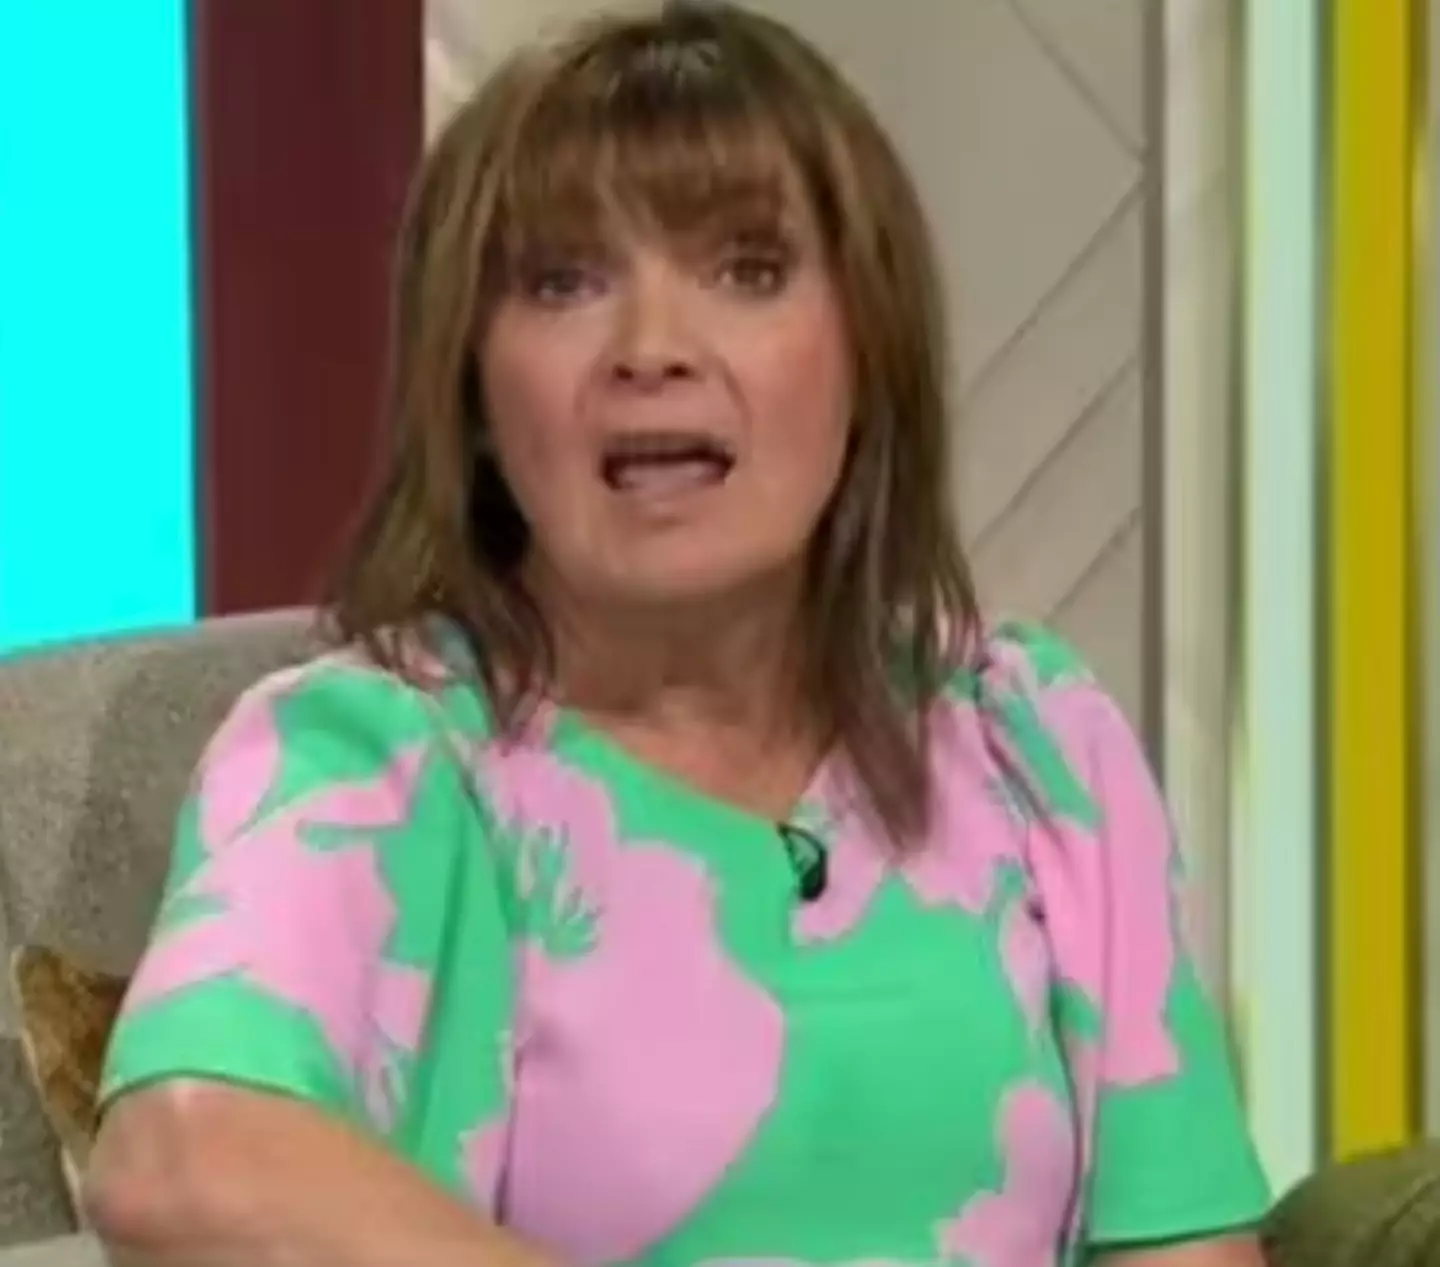 Lorraine Kelly has responded after misgendering Sam Smith.